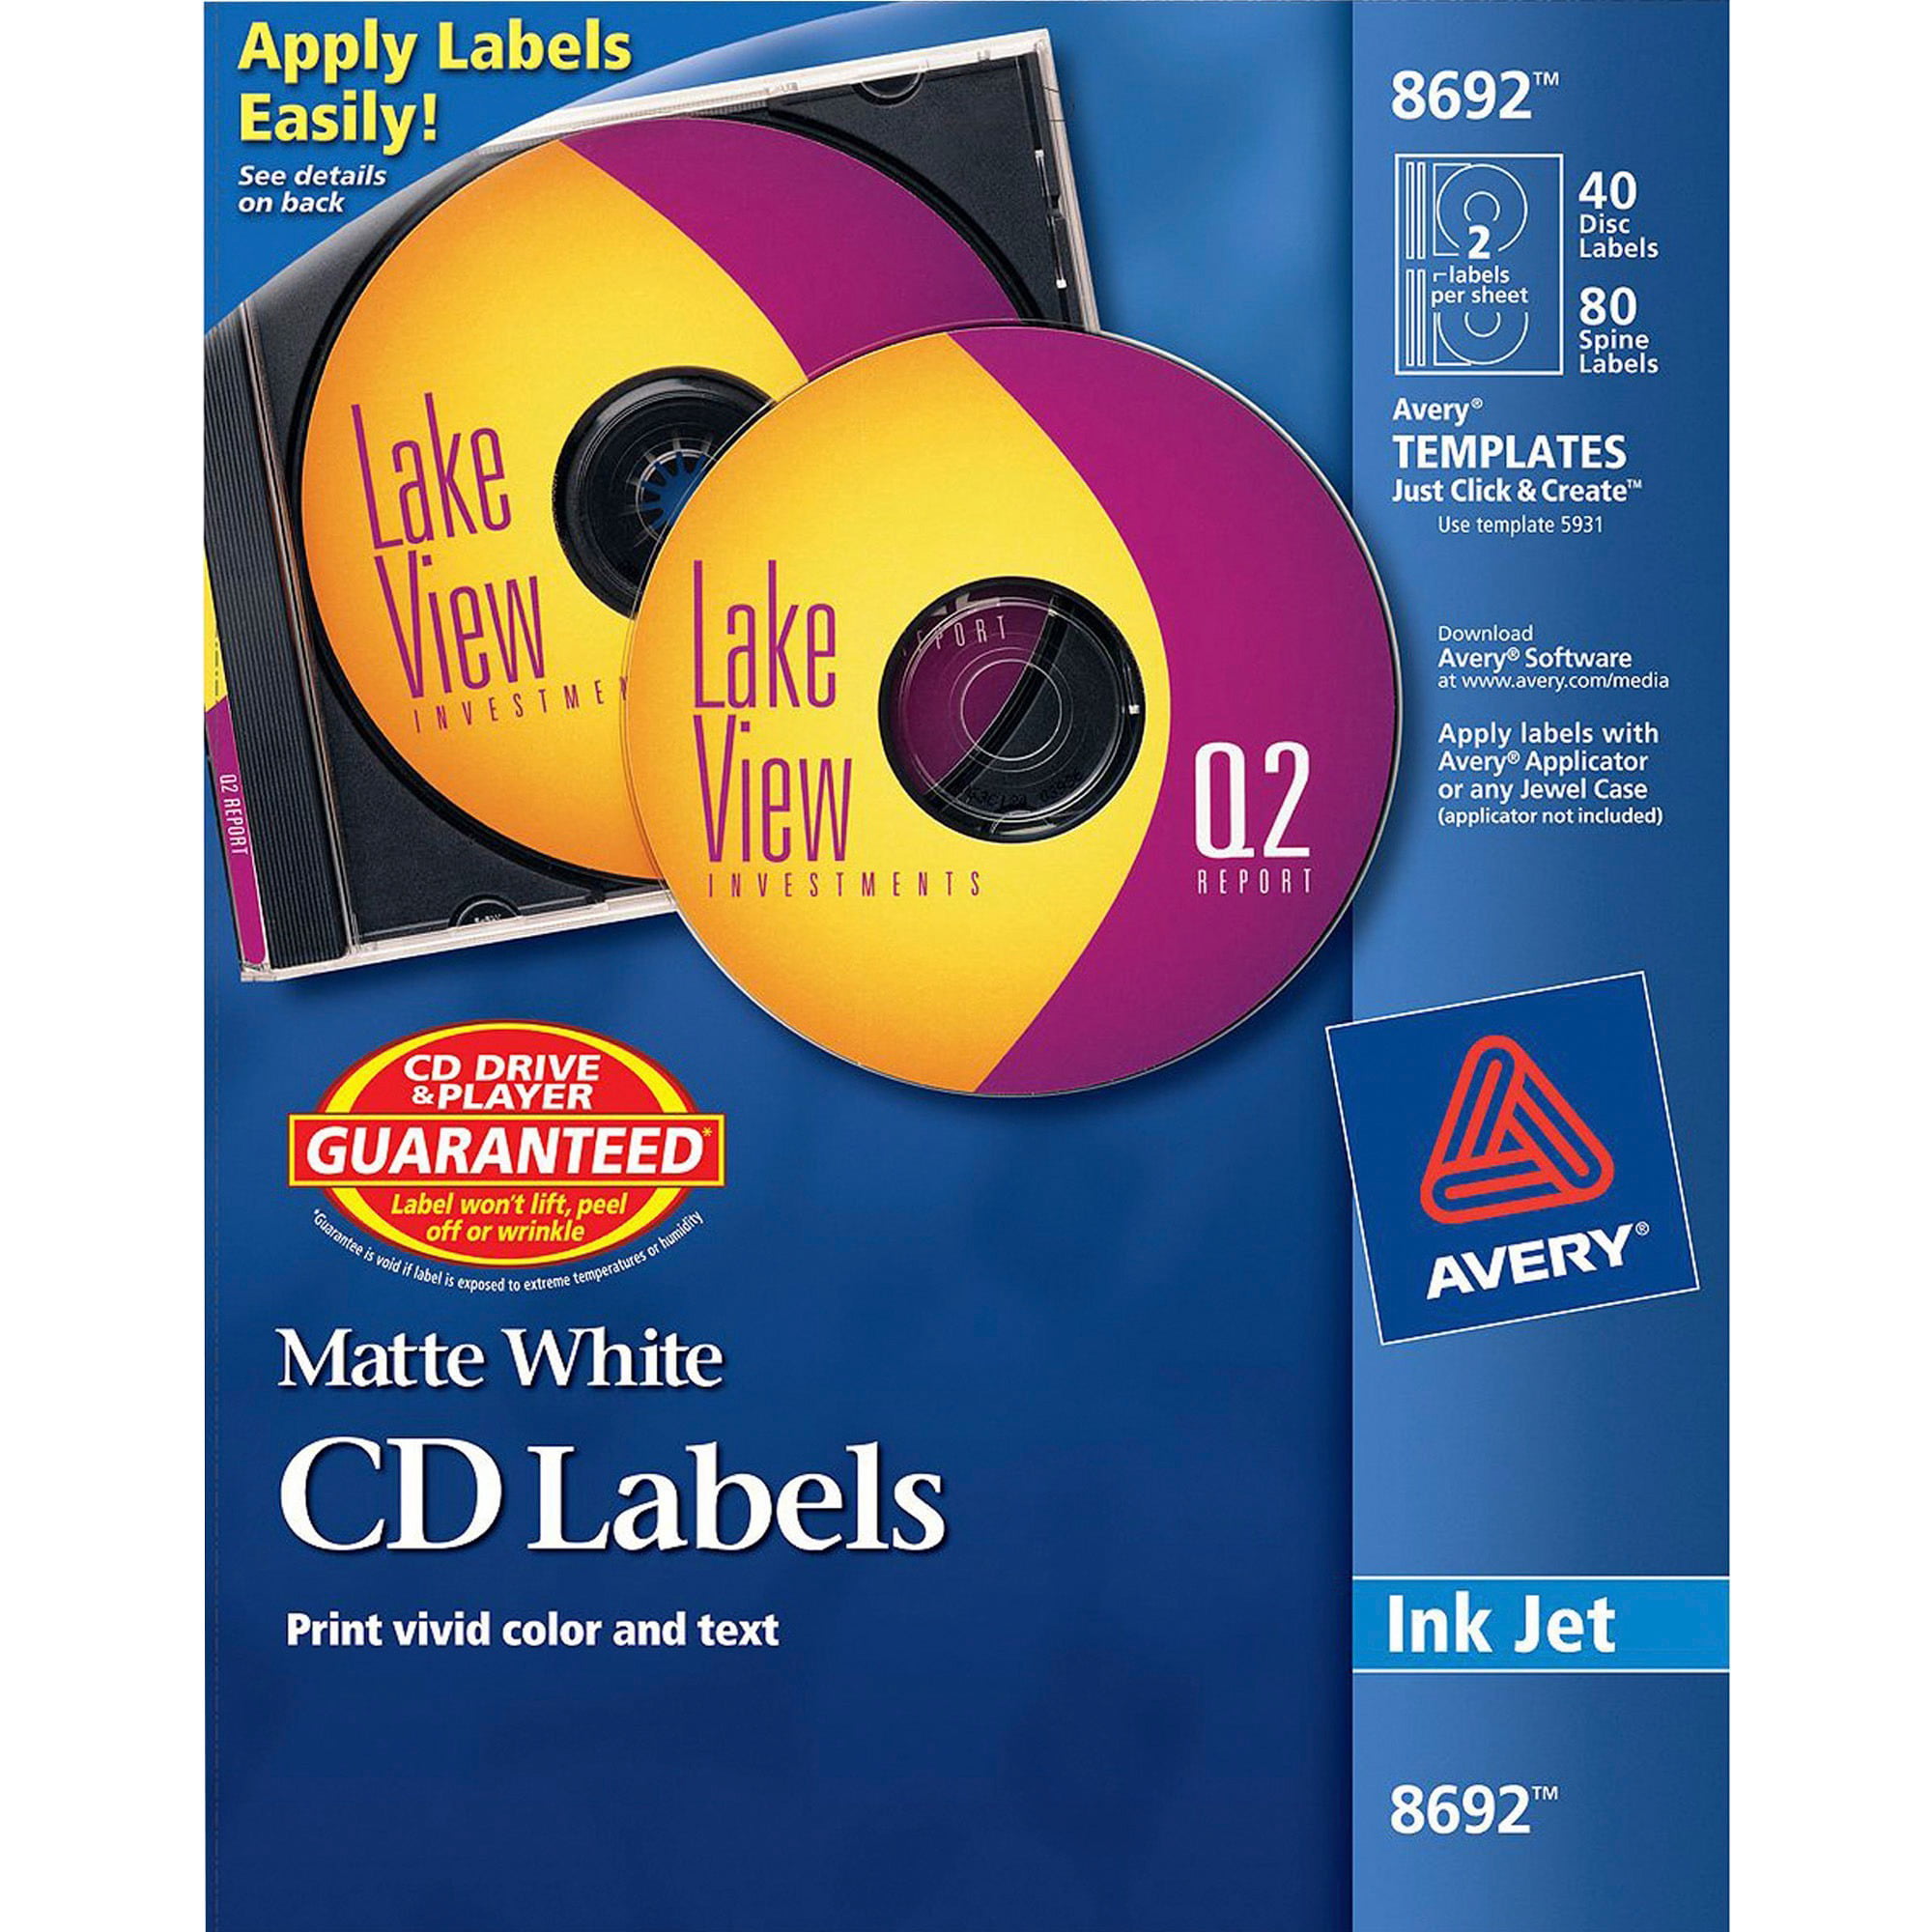 cd-labels-with-80-spine-labels-print-to-the-edge-walmart